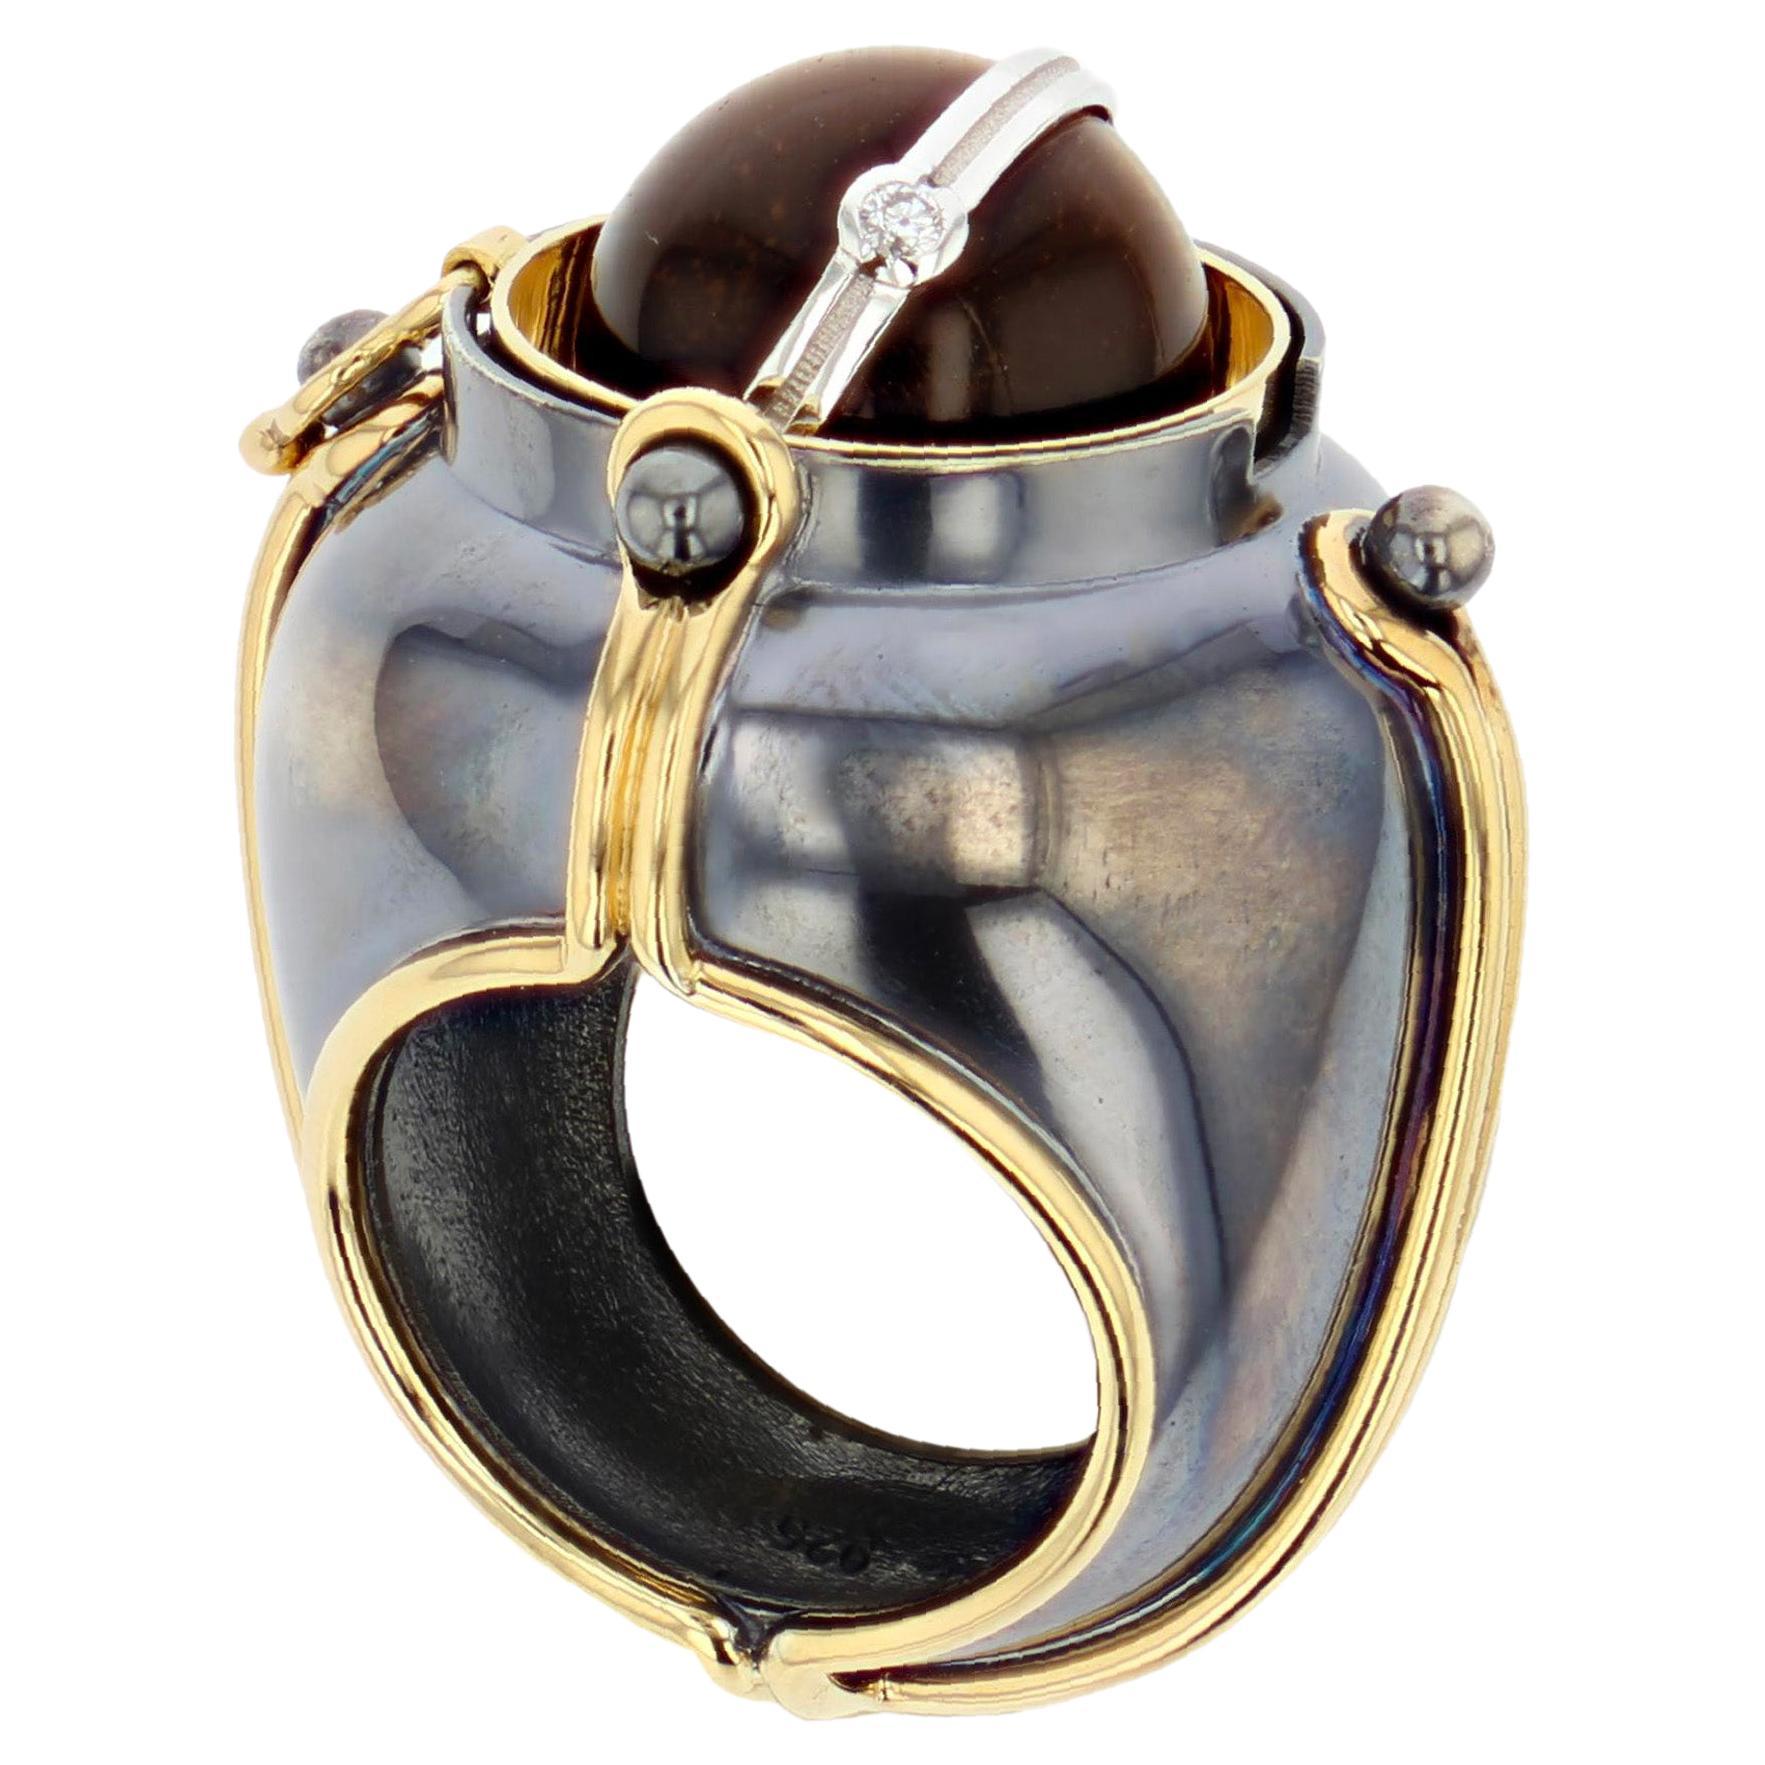 Œil de Tigre Scaphandre Ring in 18k Yellow Gold by Elie Top